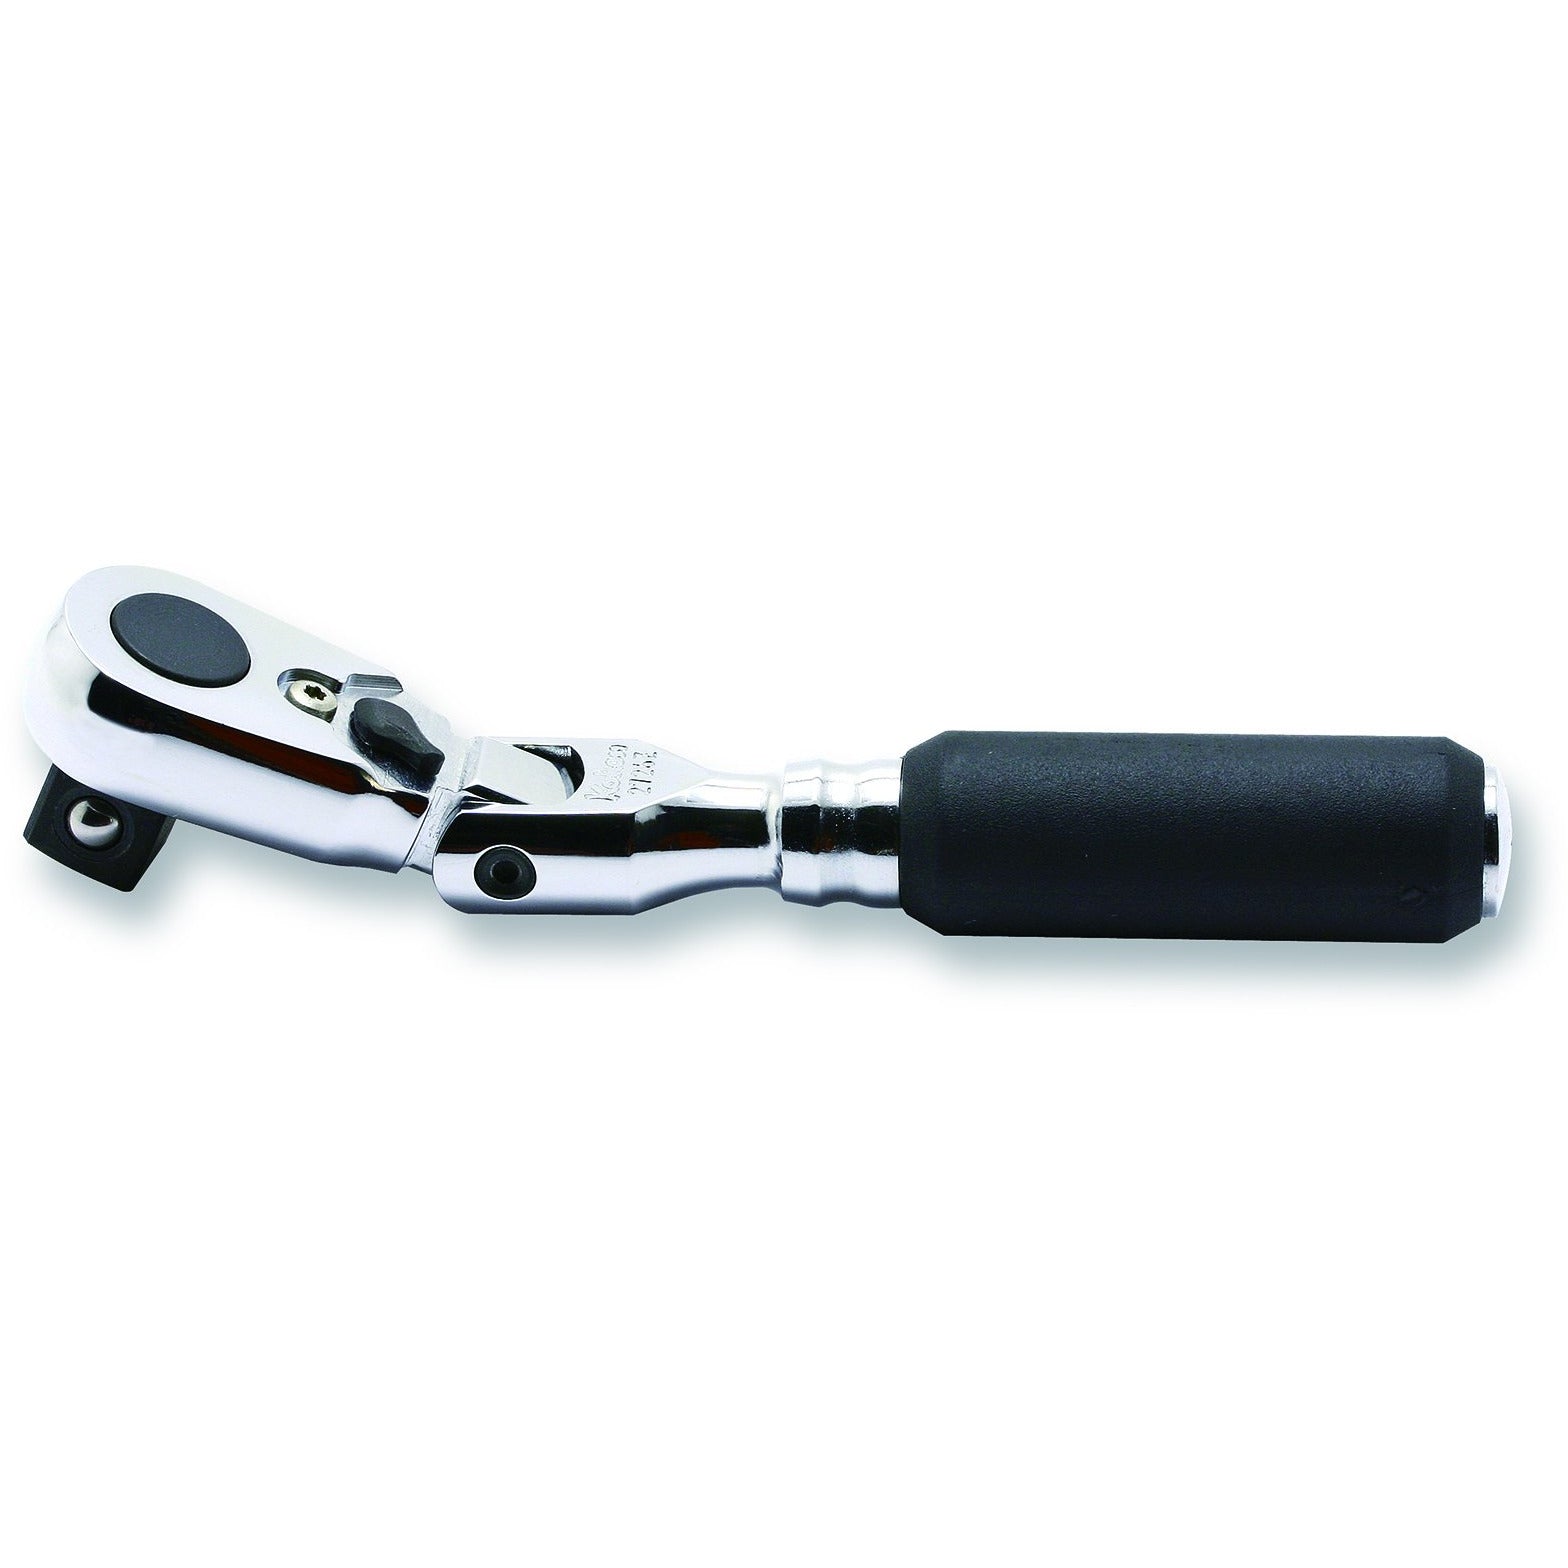 Koken 1/4" Flexi Ratchet with 3/8"Drive Square 120mm-Sockets & Accessories-Tool Factory